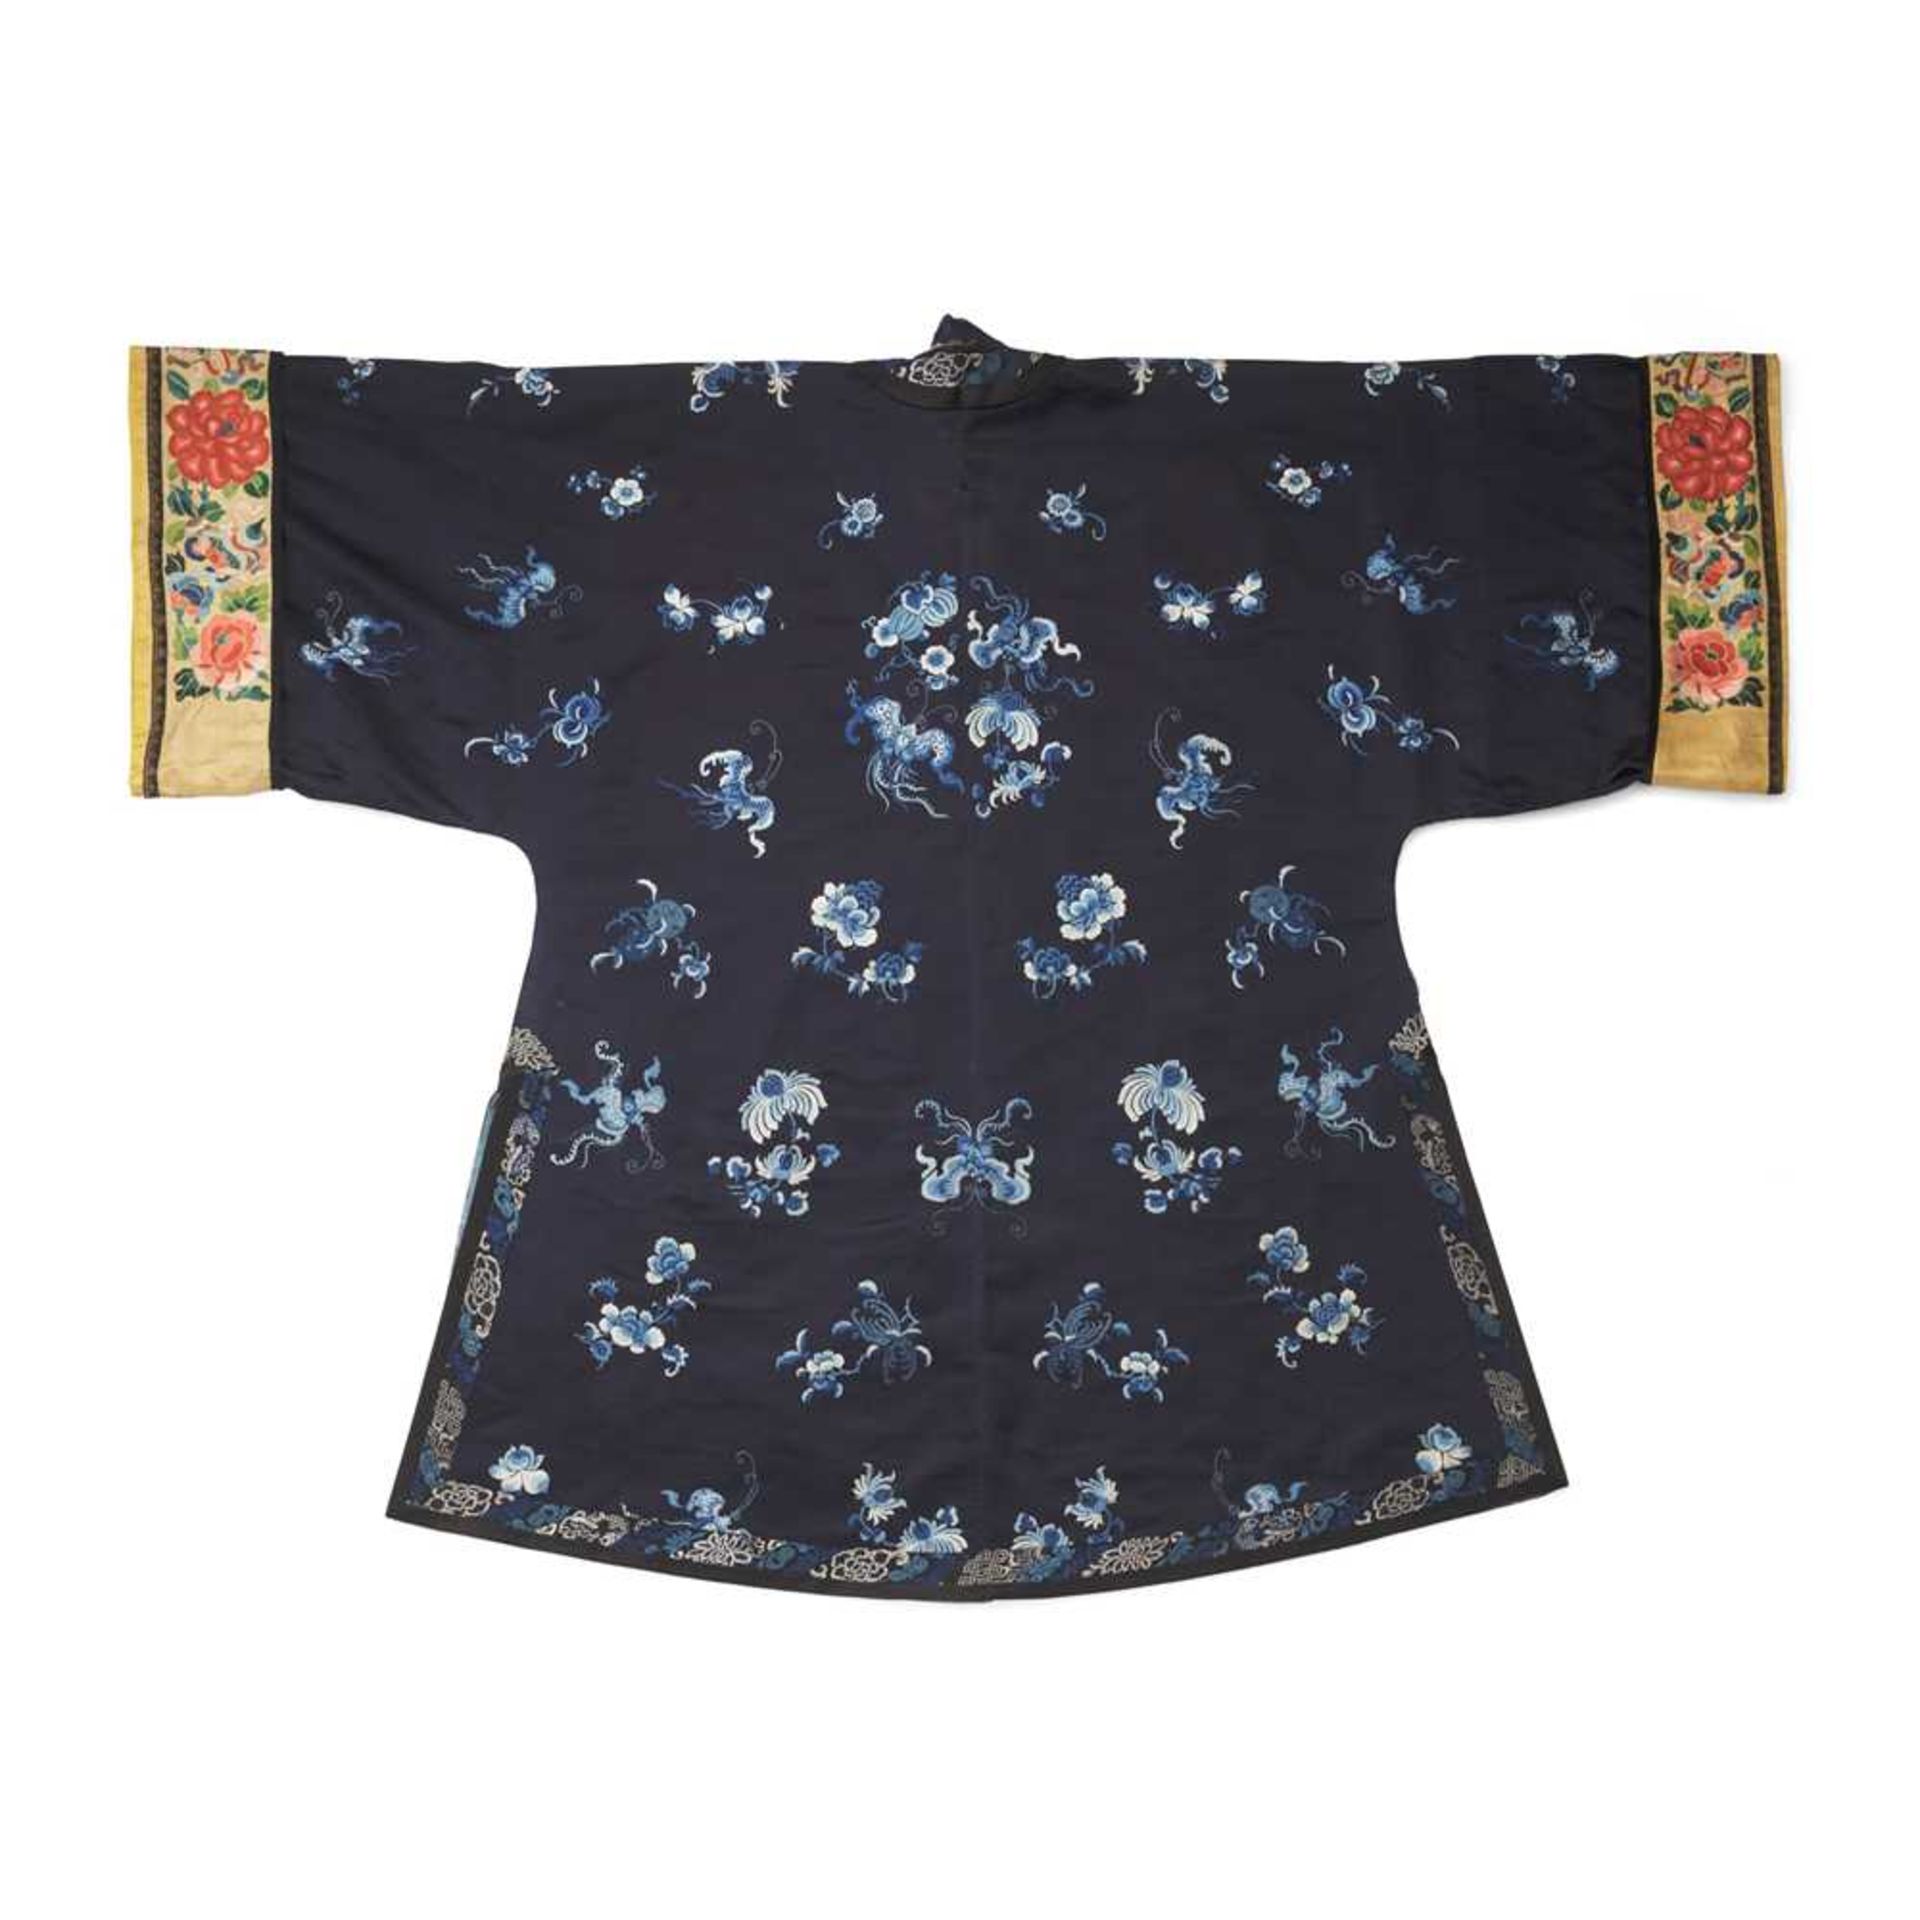 MIDNIGHT-BLUE-GROUND SILK EMBROIDERED LADY'S OVERCOAT LATE QING DYNASTY-REPUBLIC PERIOD, 19TH-20TH C - Image 2 of 2